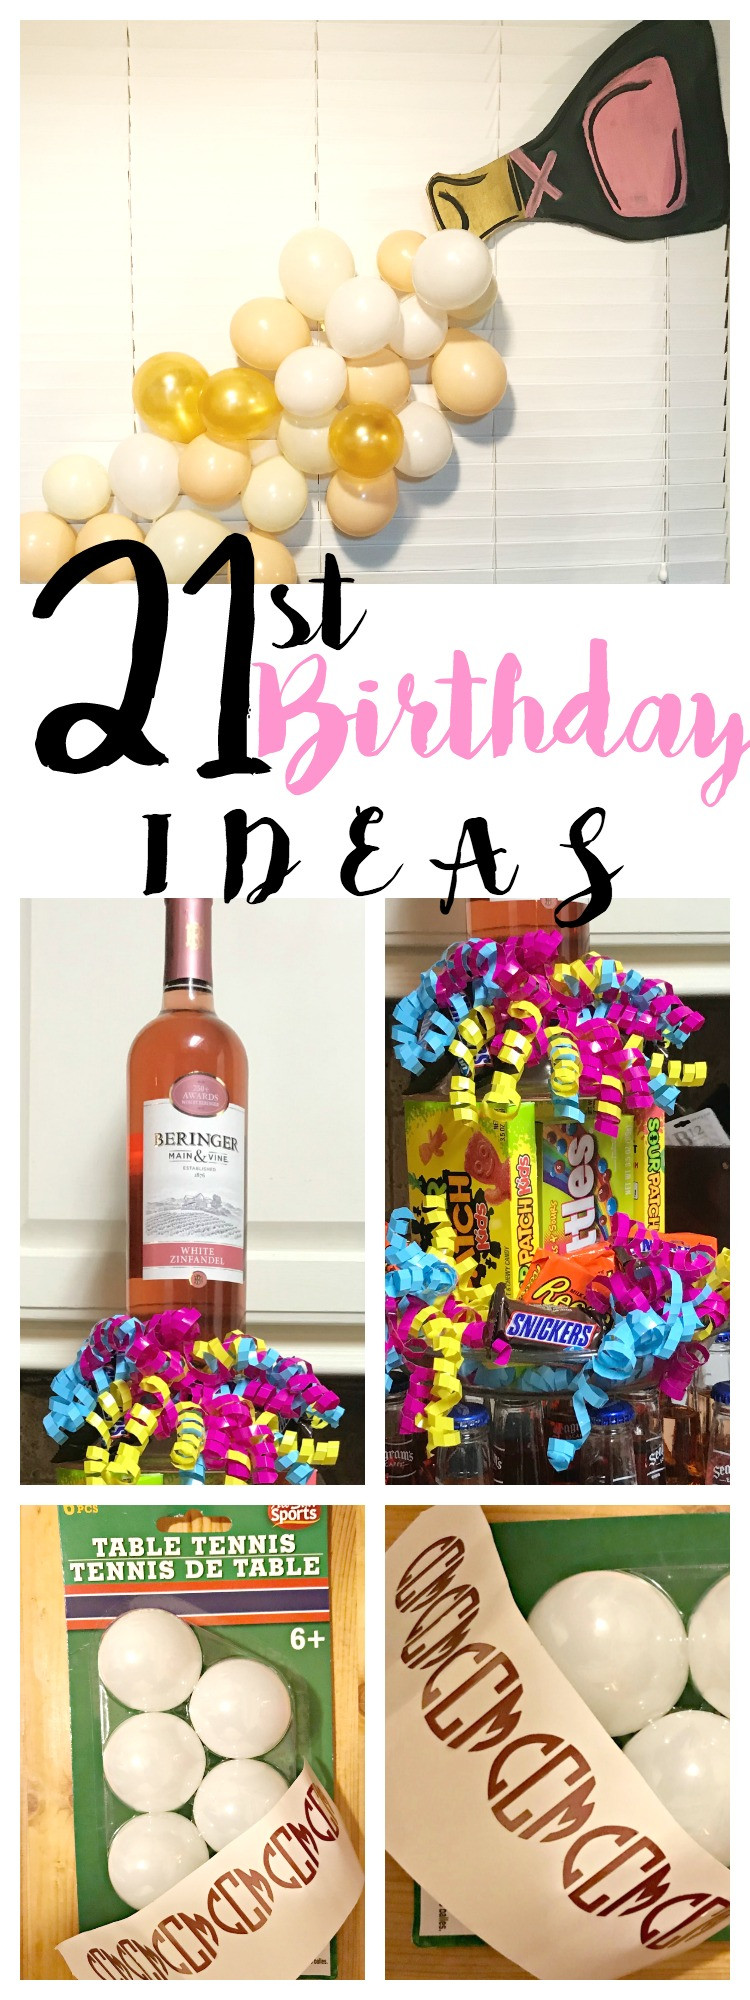 21st Birthday Party Decorations
 21st Birthday Party Ideas